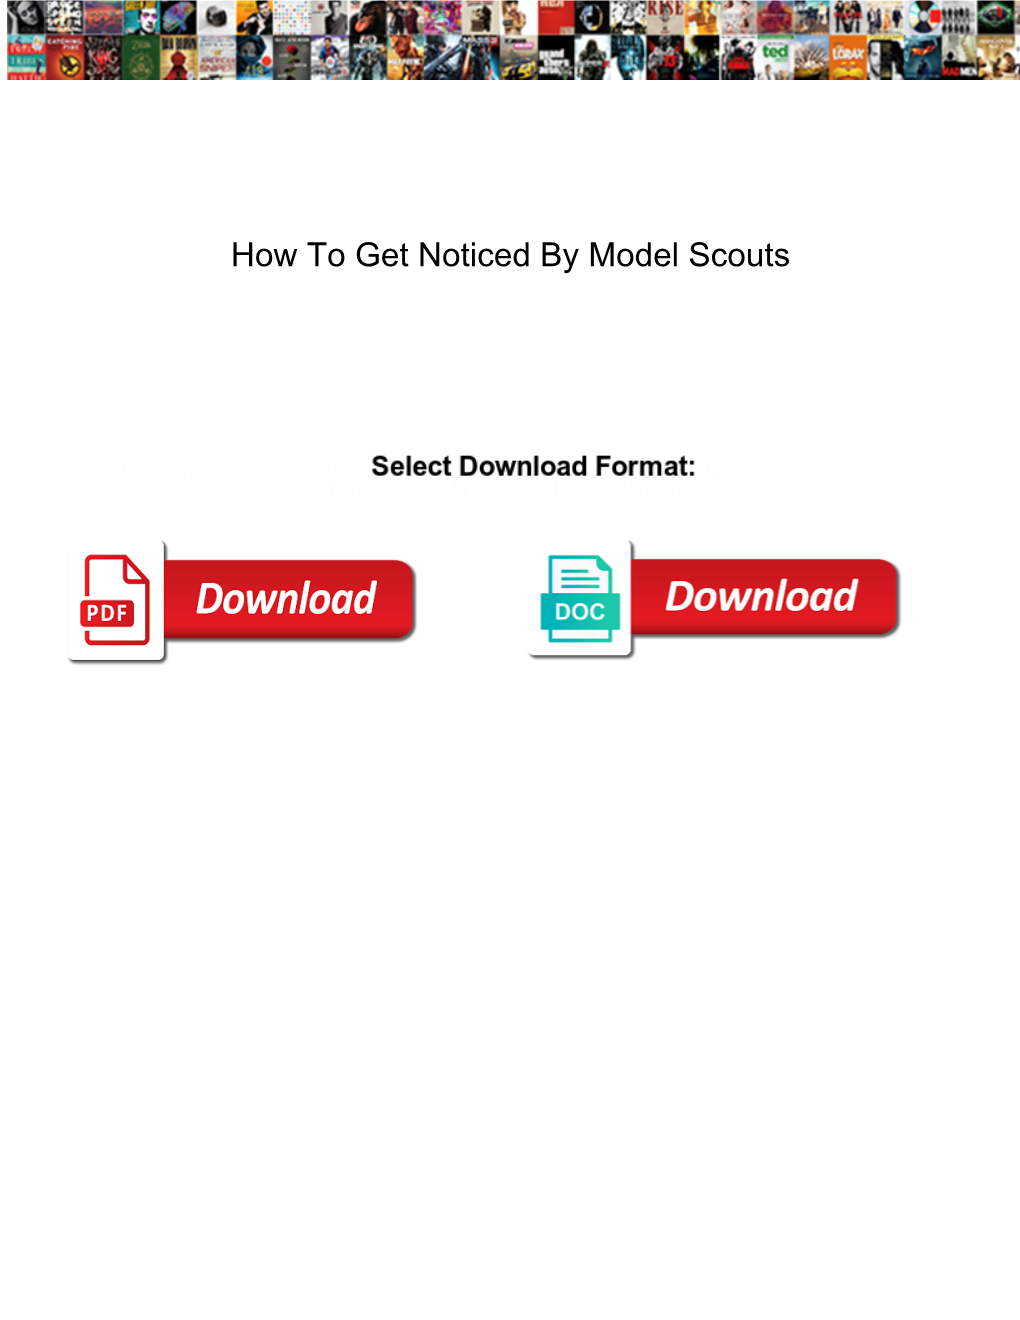 How to Get Noticed by Model Scouts